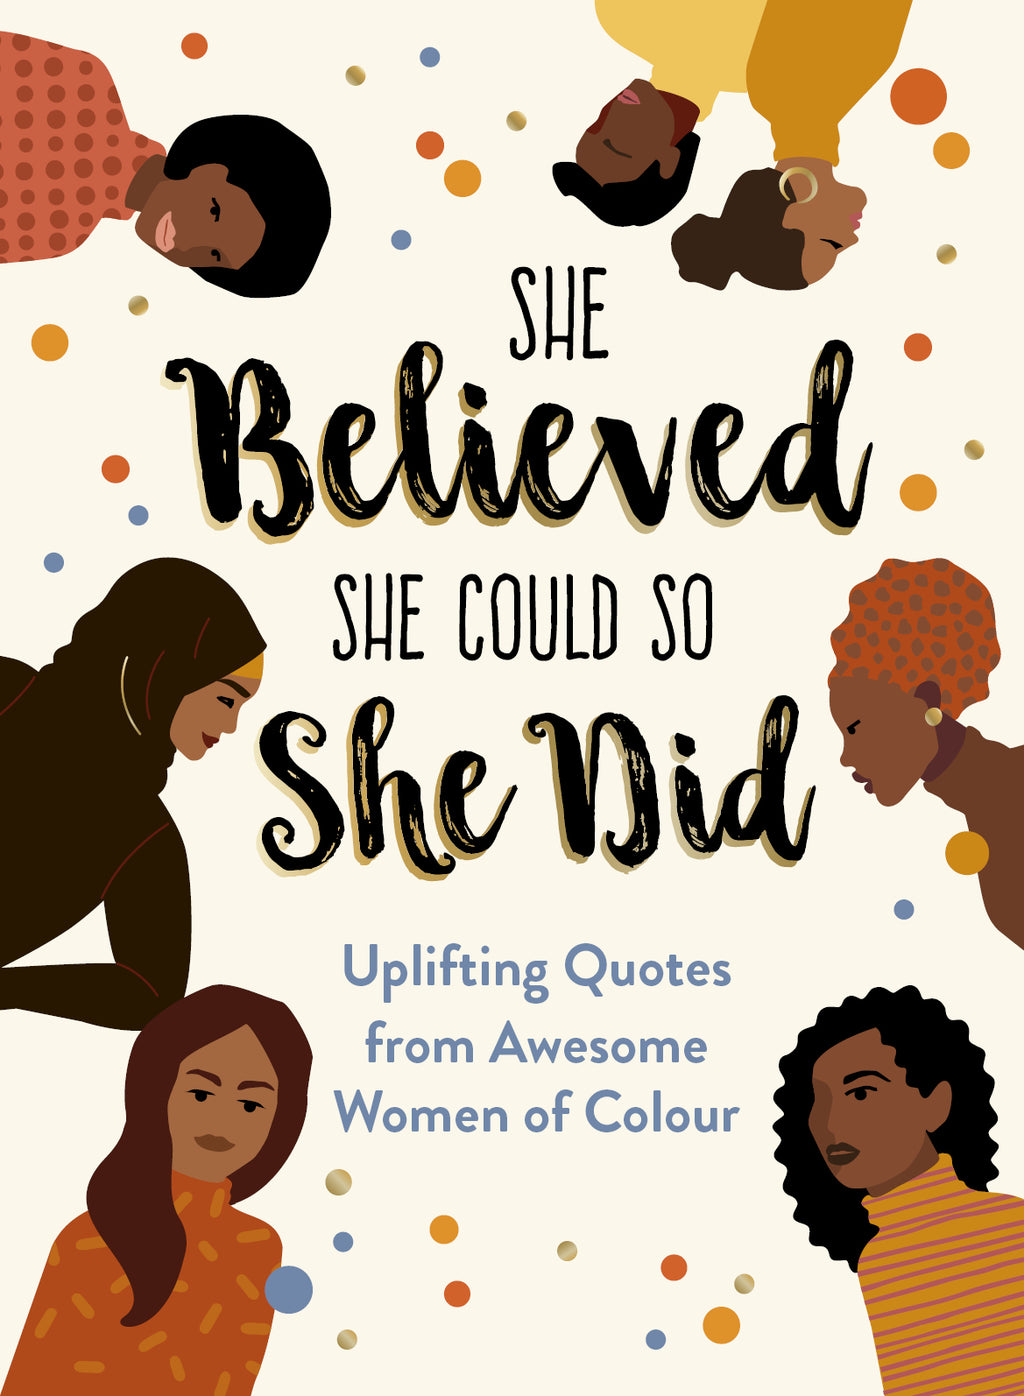 She believed she could so she did book | AfroTouch Design